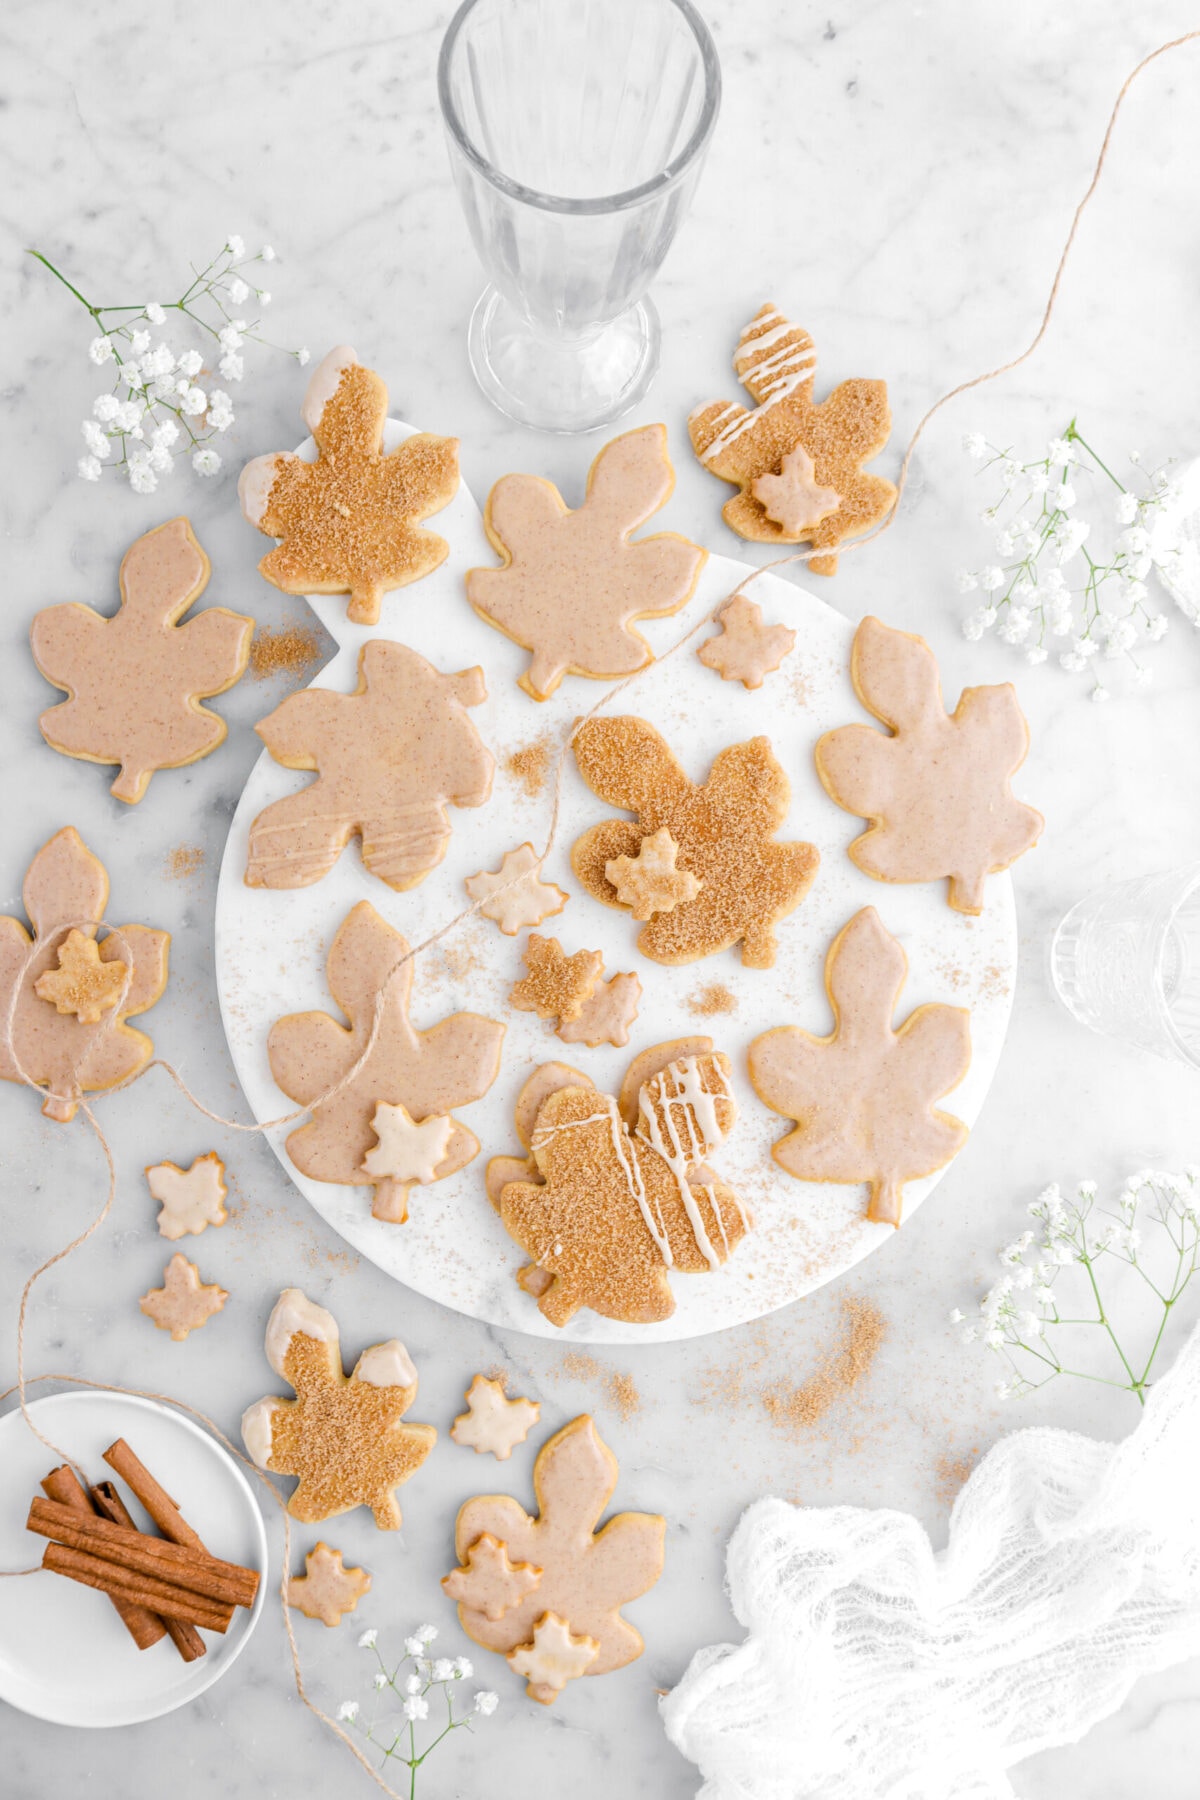 overhead image of maple cookies on marble surface with cooking twine, cinnamon sticks, white flowers, cheesecloth, an empty glass on marble surface.